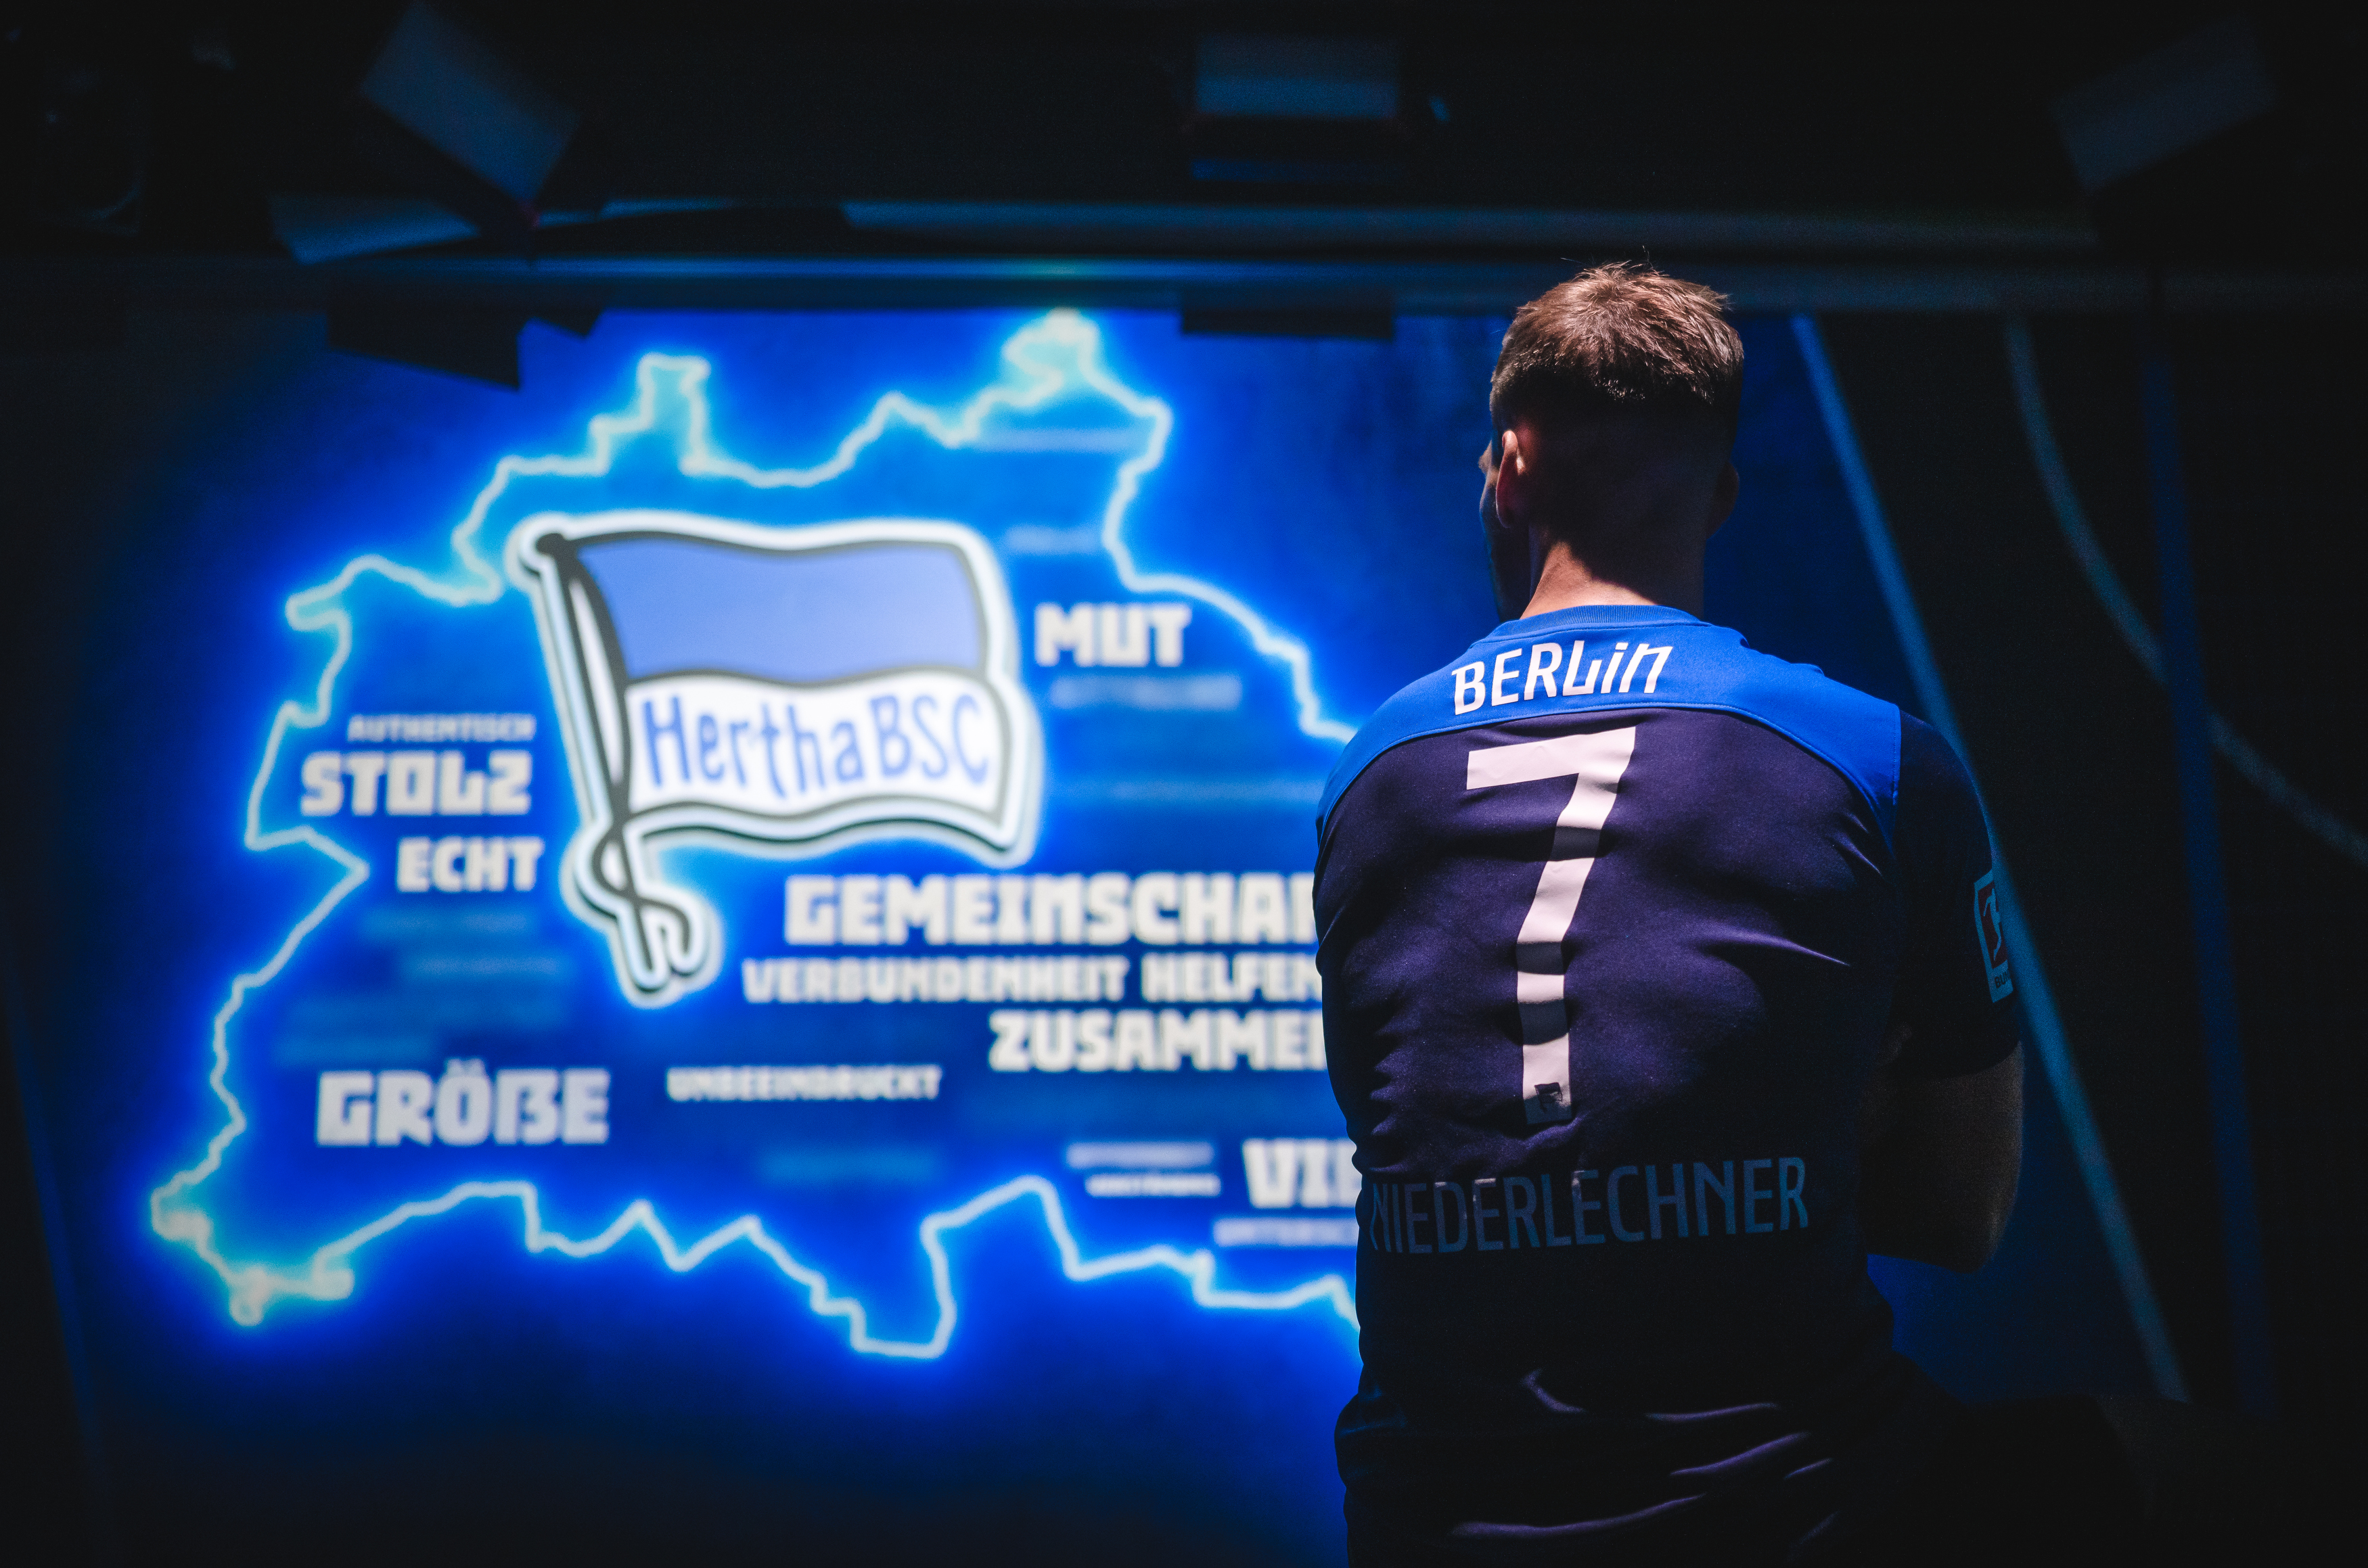 Florian Niederlechner wears the away jersey with his name on the back.